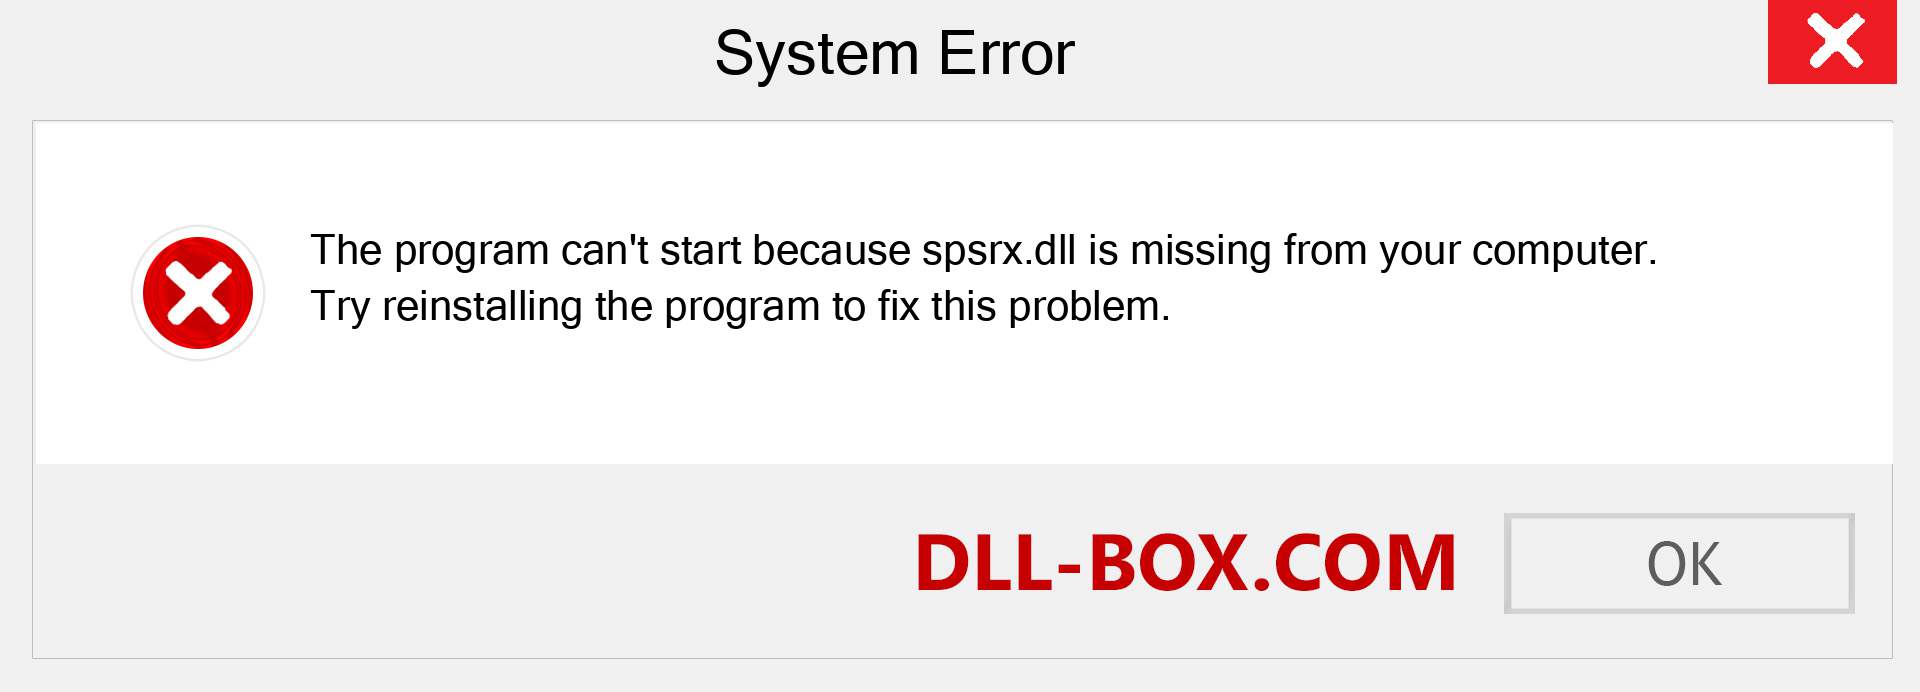  spsrx.dll file is missing?. Download for Windows 7, 8, 10 - Fix  spsrx dll Missing Error on Windows, photos, images